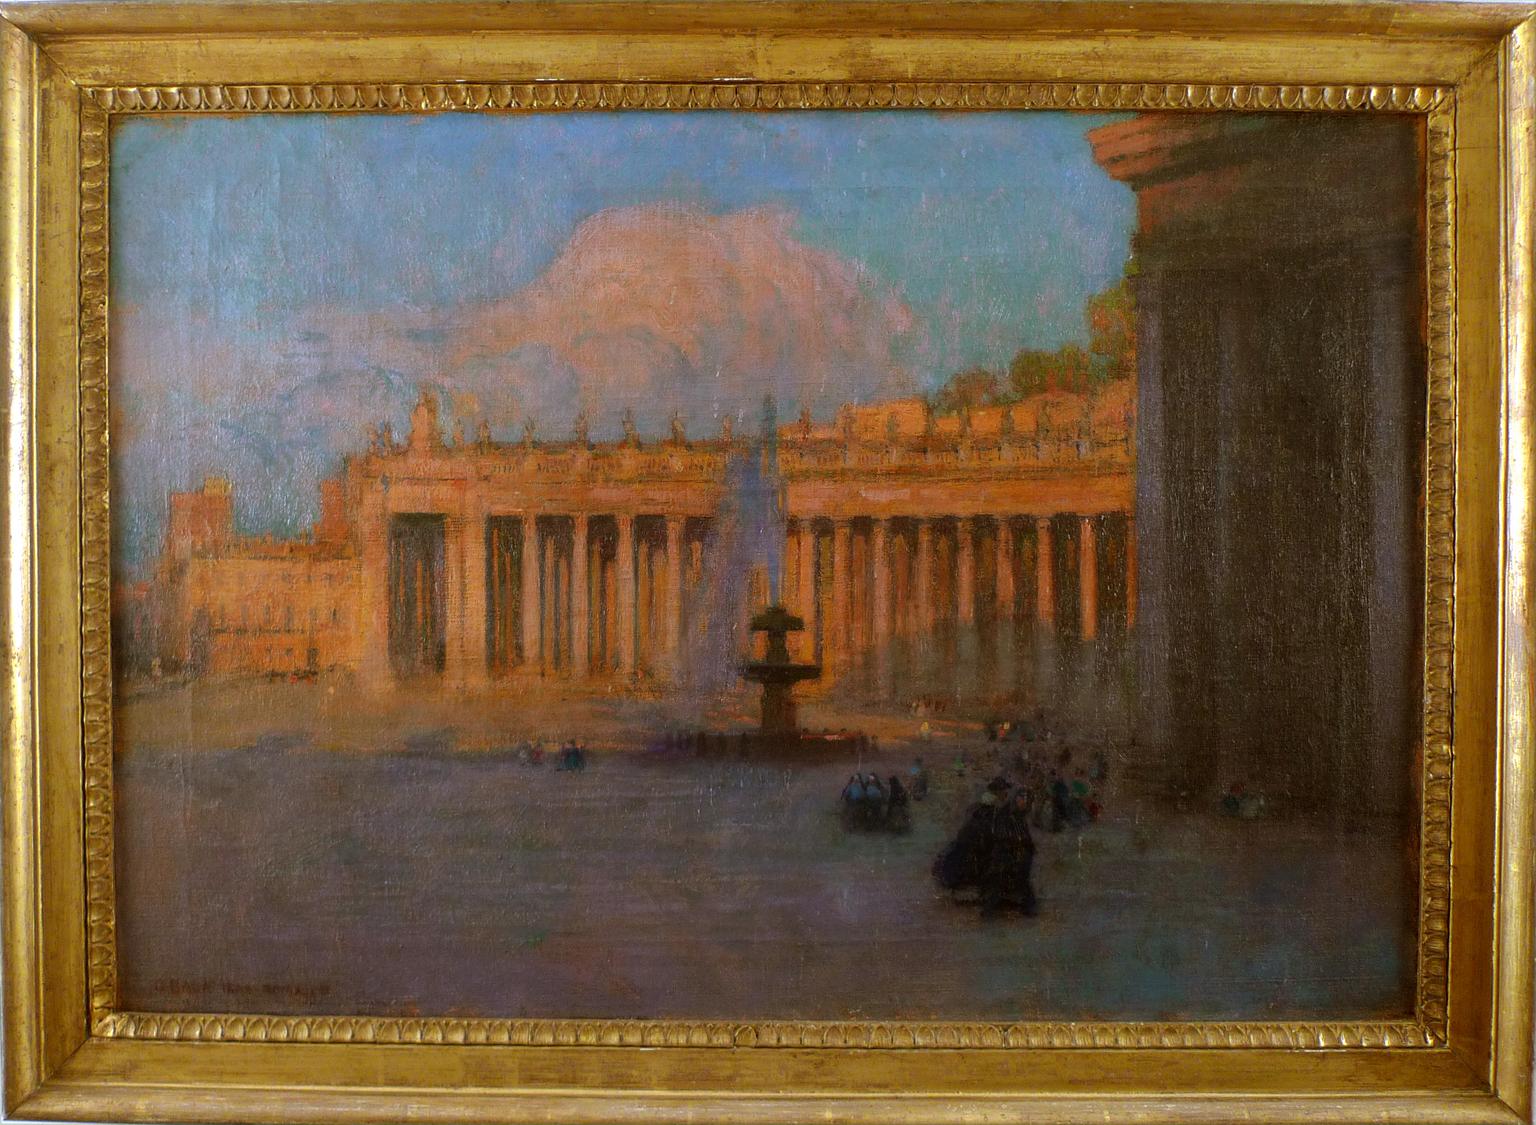 "Saint Peter's Square, Rome", 19th Century Oil on Canvas by Gustavo Bacarisas